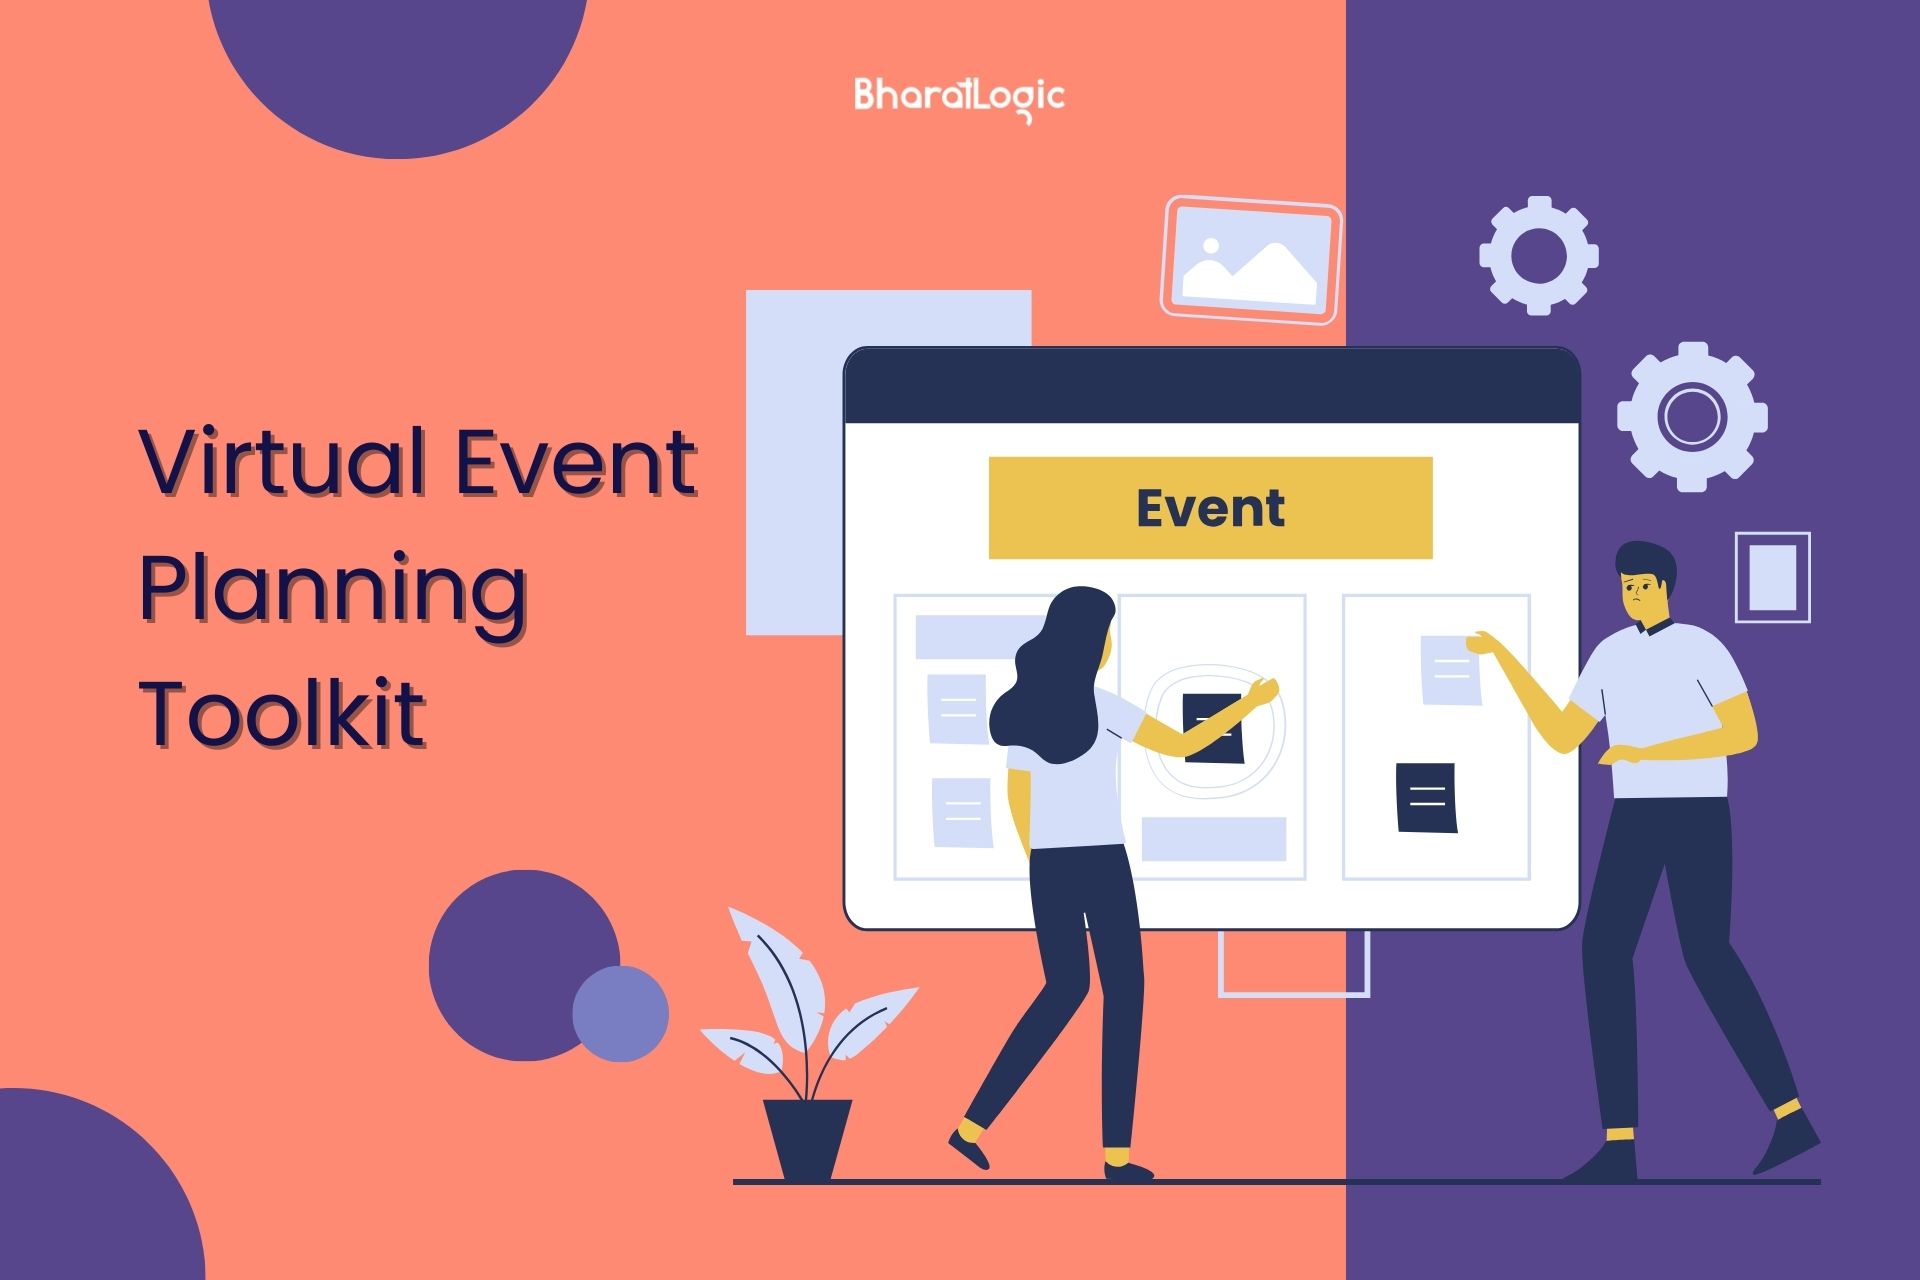 Virtual Event Planning Toolkit